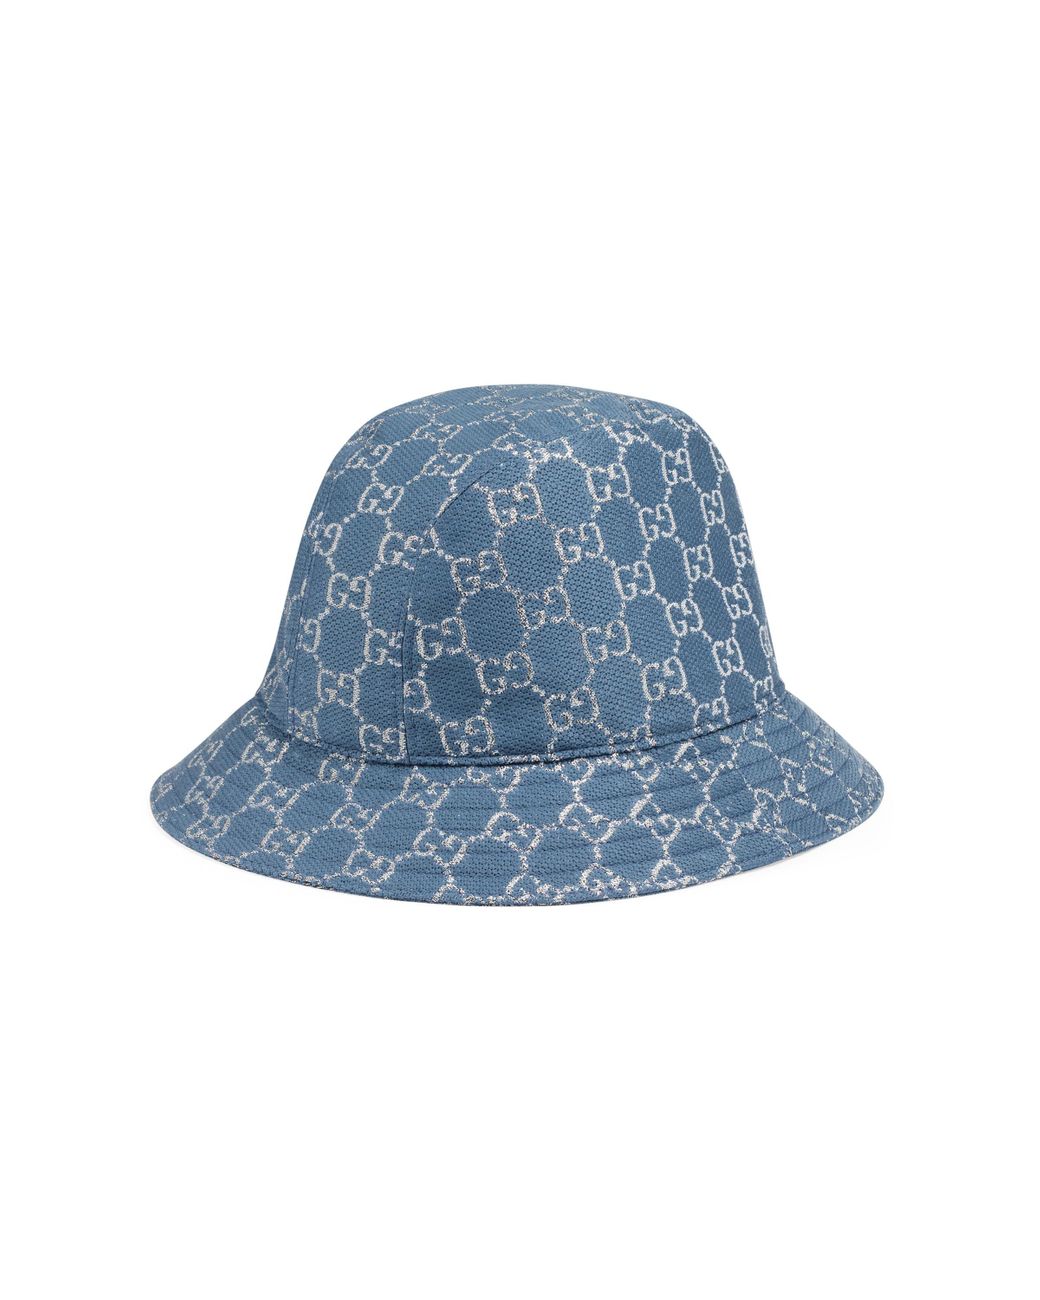 Gucci GG Lamé Bucket Hat in Turquoise Blue (Blue) - Save 30% | Lyst